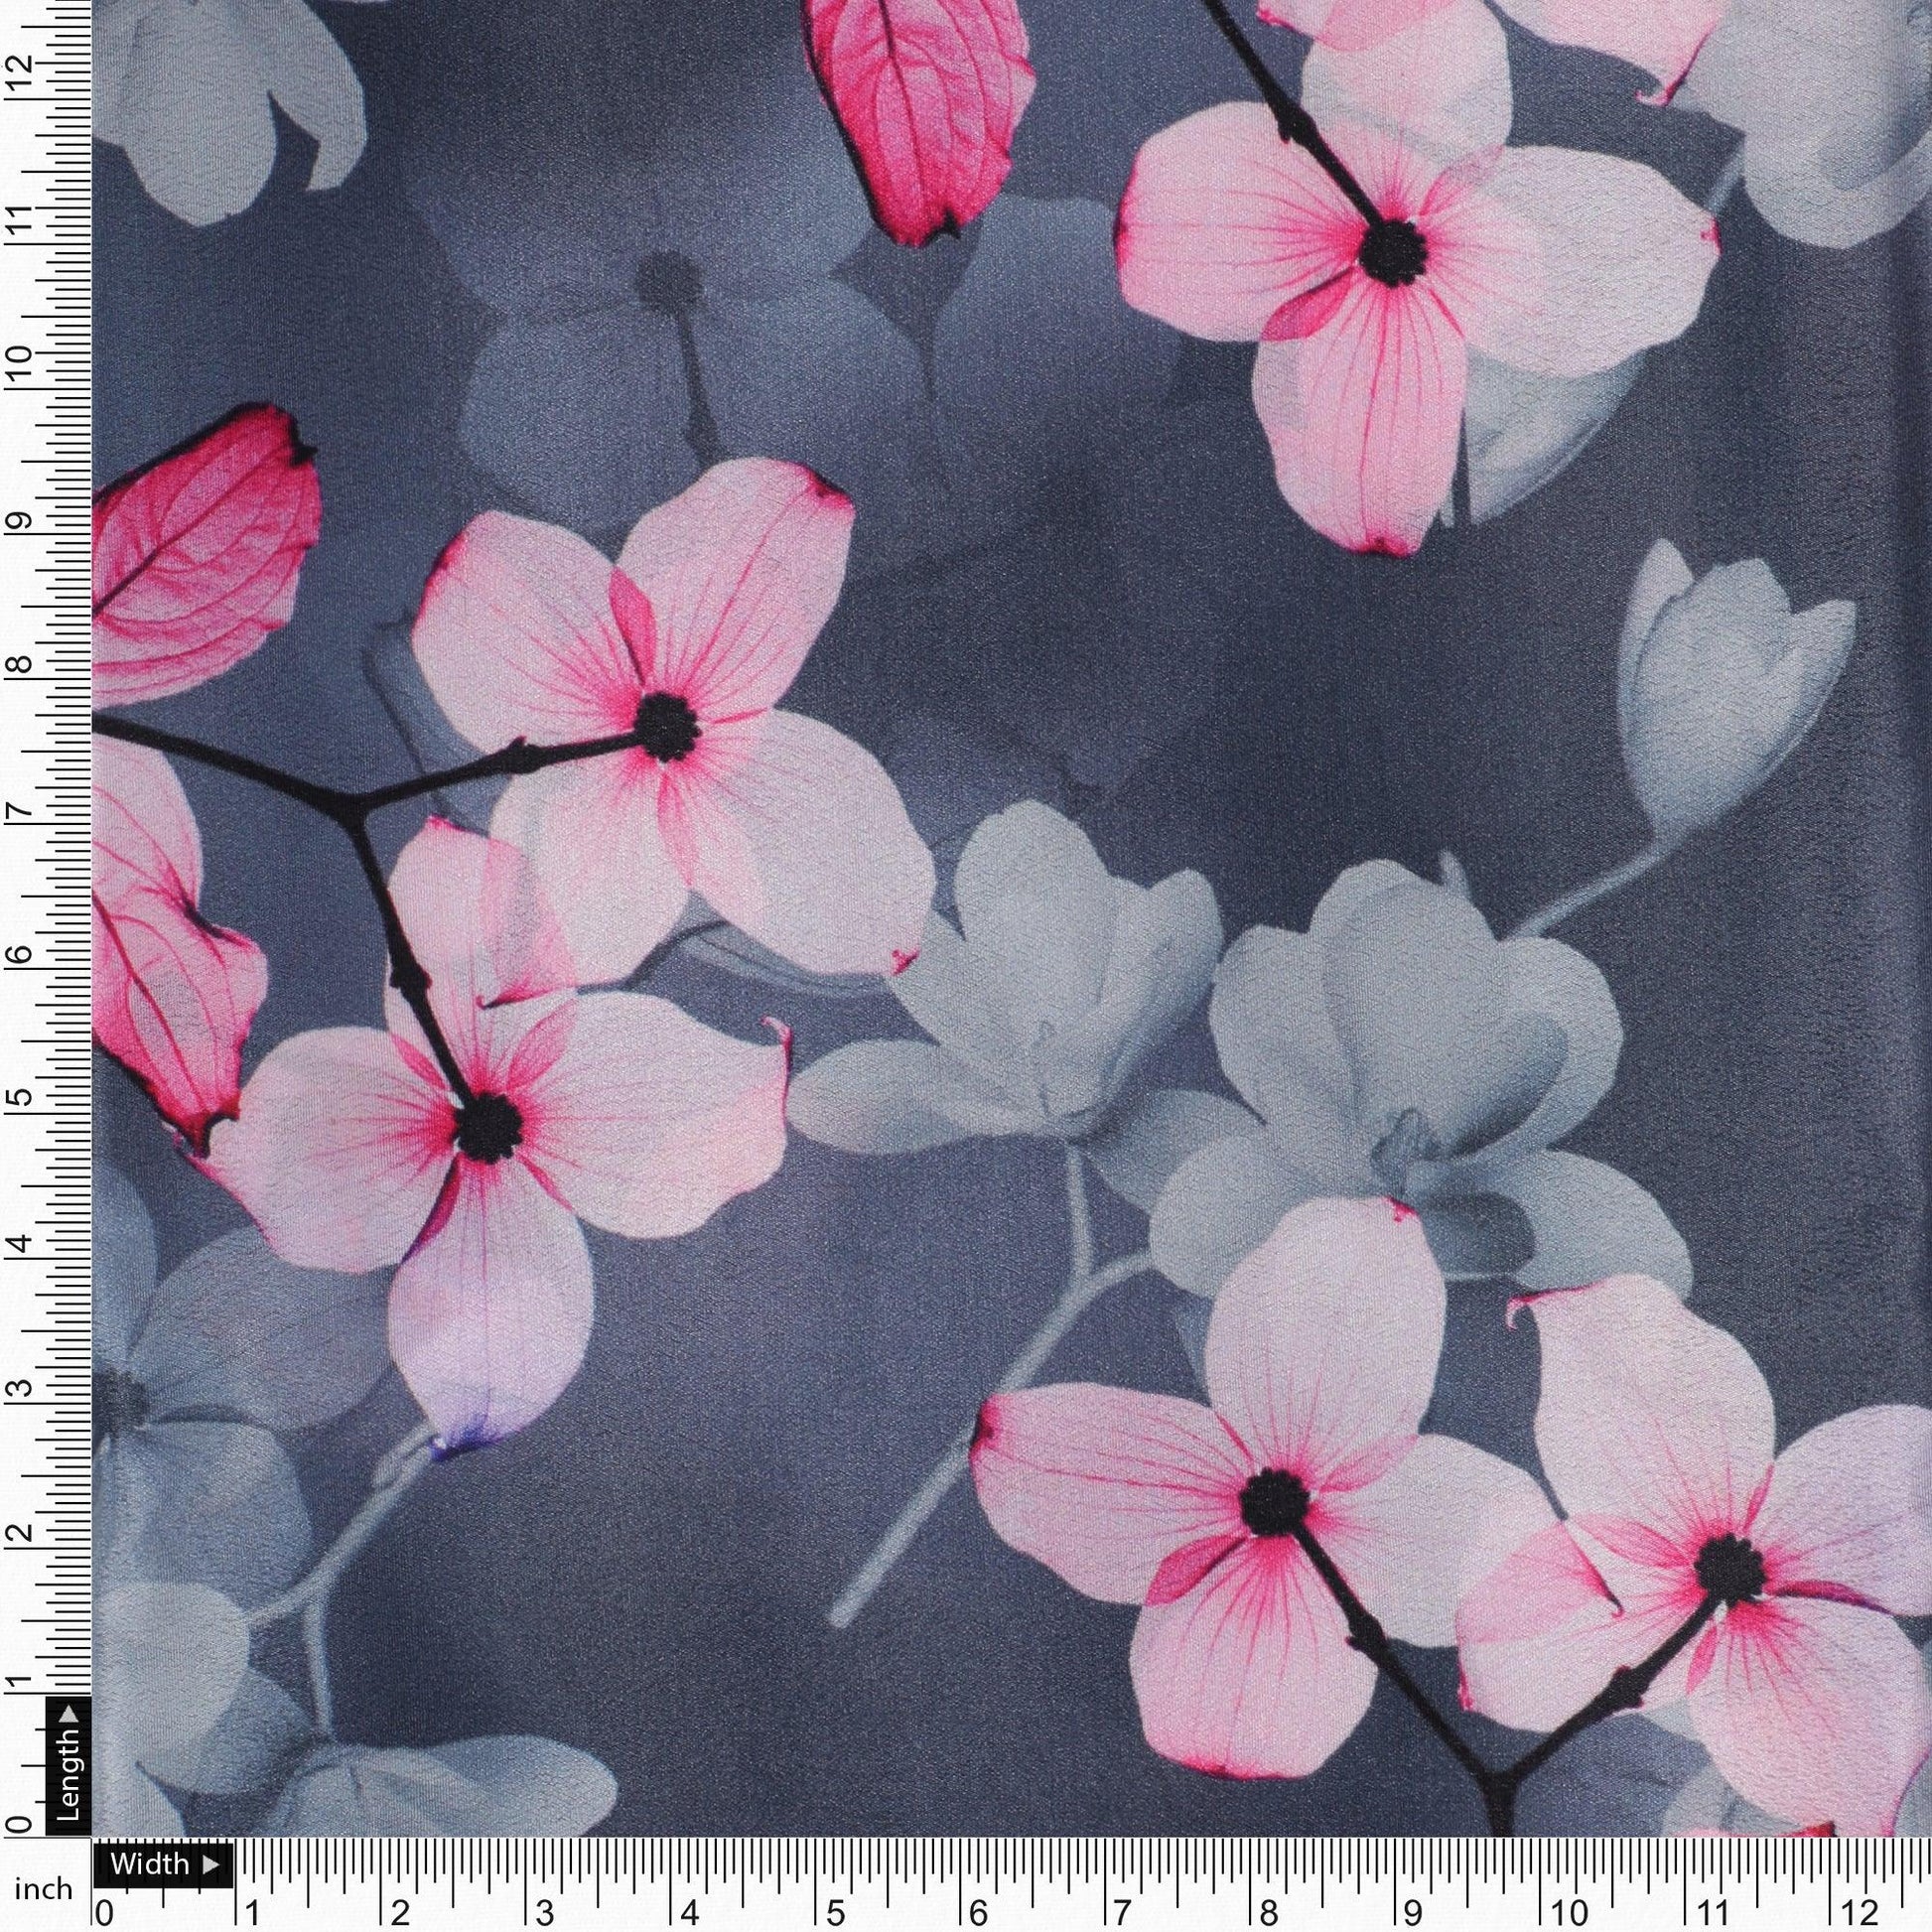 Pink Orchid Flower With Grey Background Digital Printed Fabric - Silk Crepe - FAB VOGUE Studio®